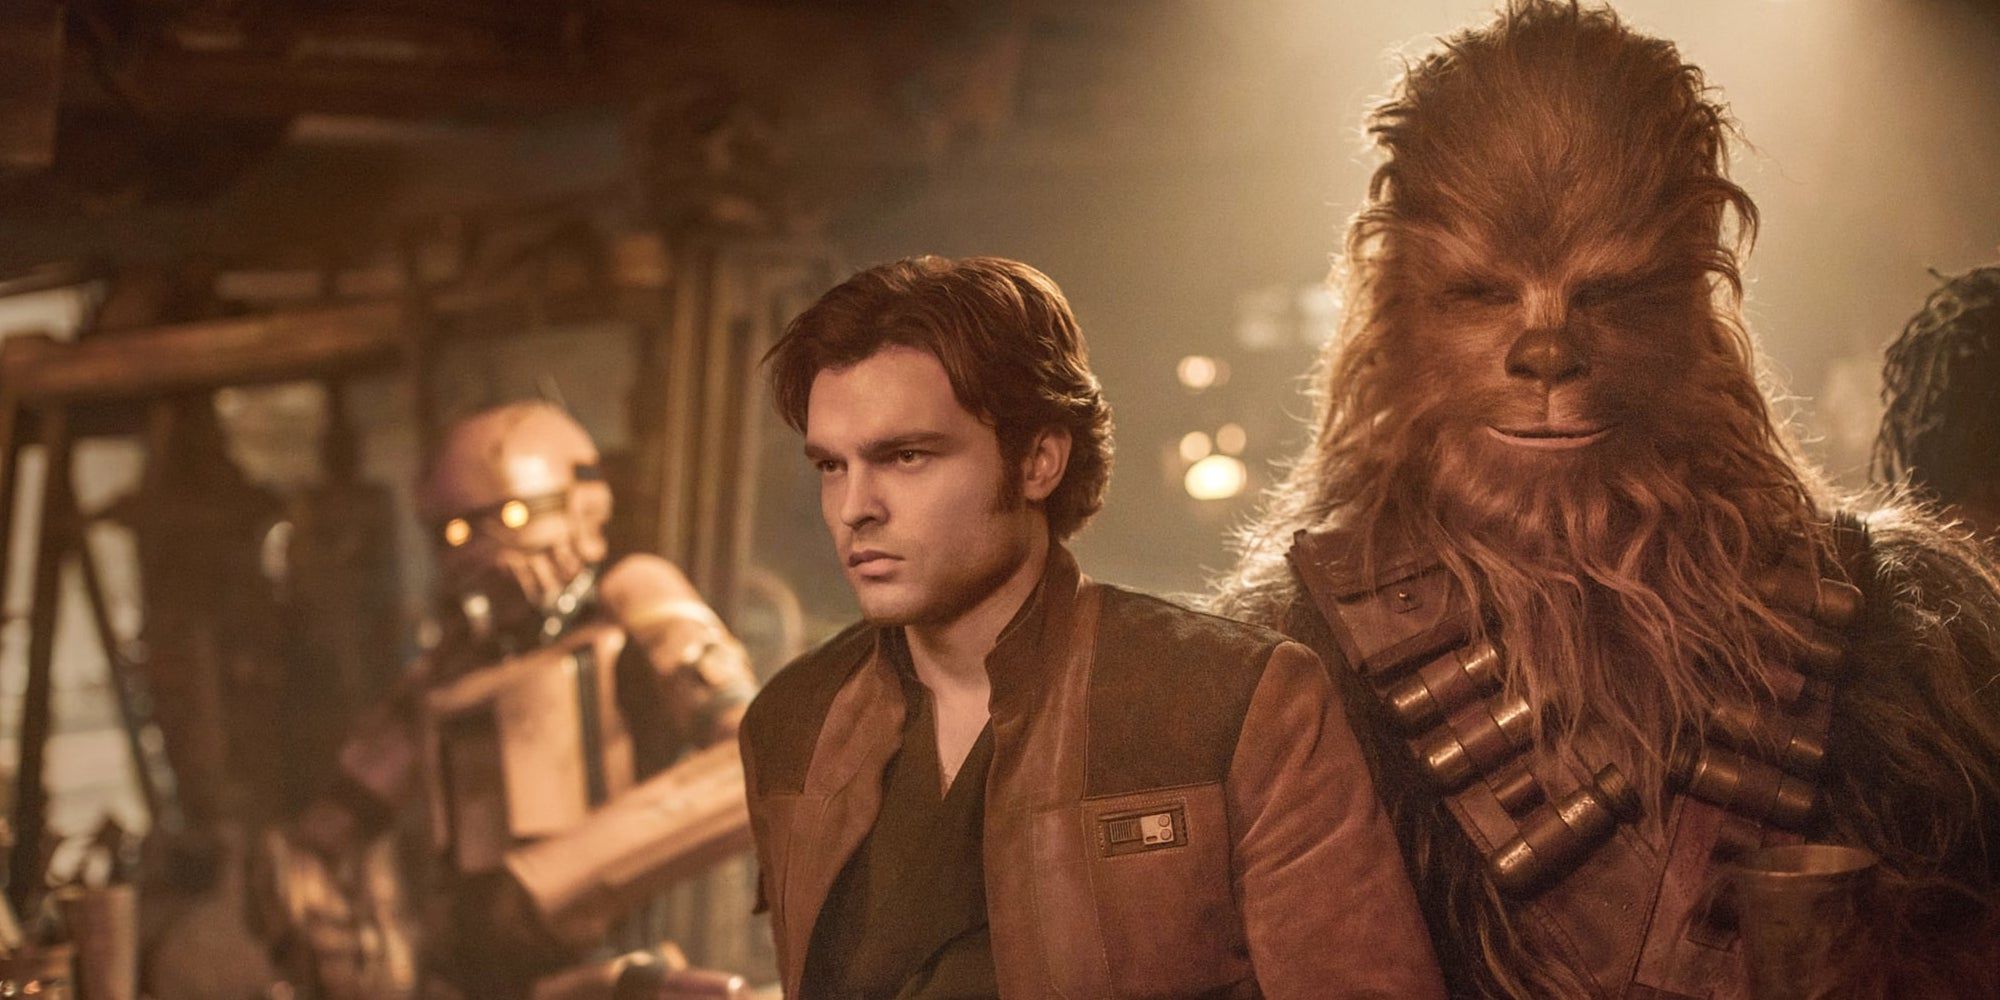 Alden Ehrenreich as Han Solo and Chewbacca in Solo: A Star Wars Story